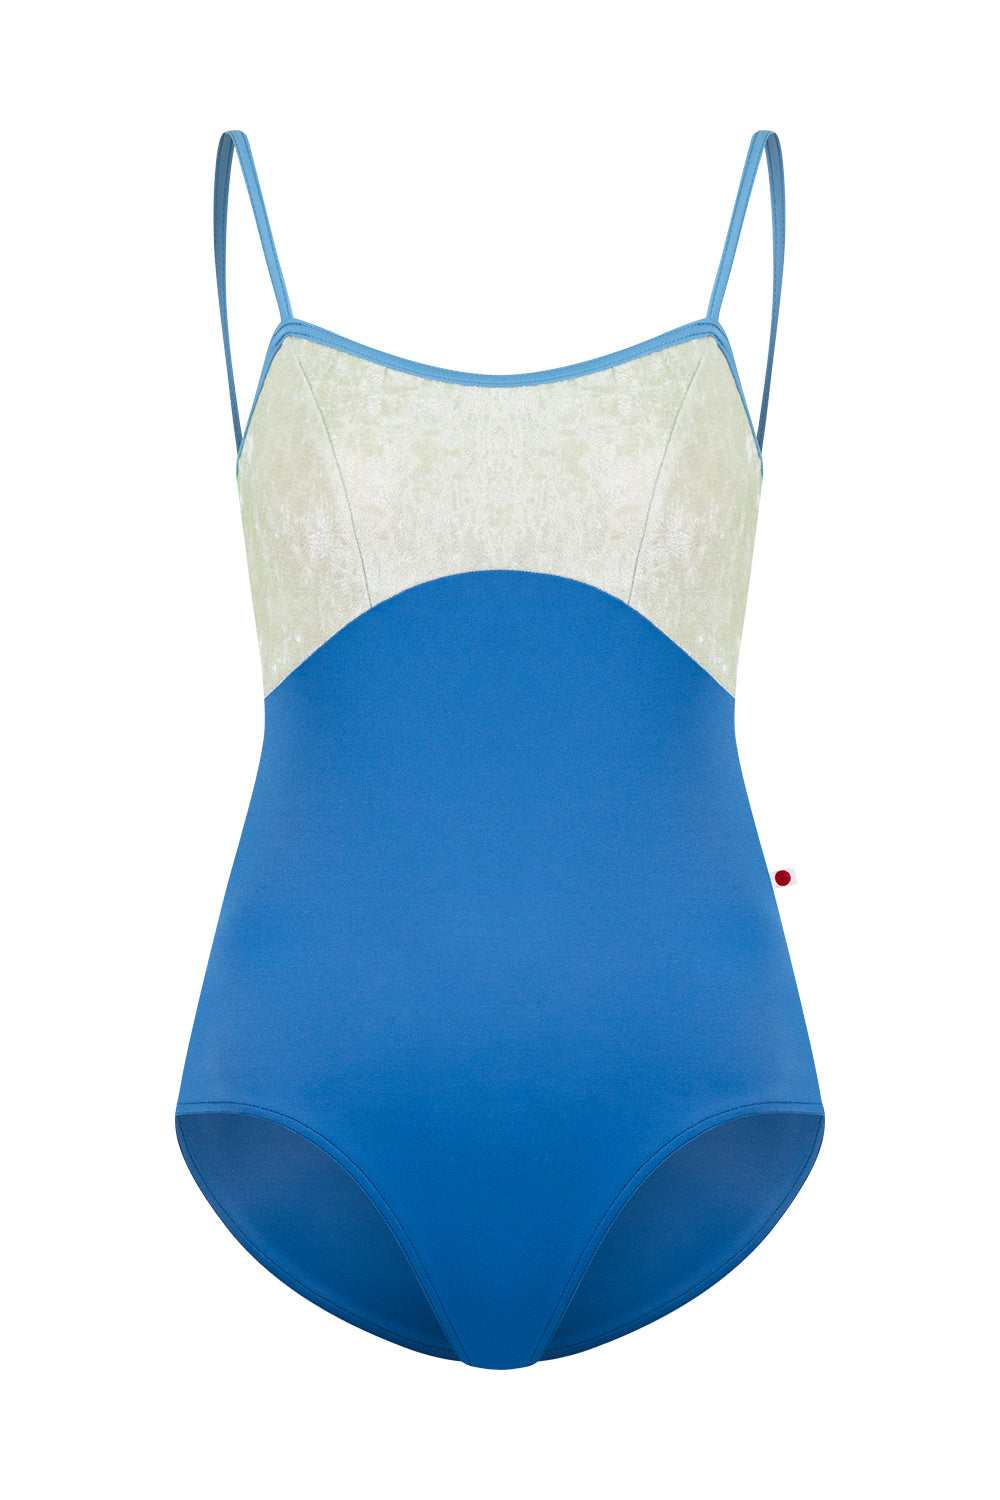 Denise leotard in T-Lapis body color with CV-Pistachio top color and T-Bluebell trim color